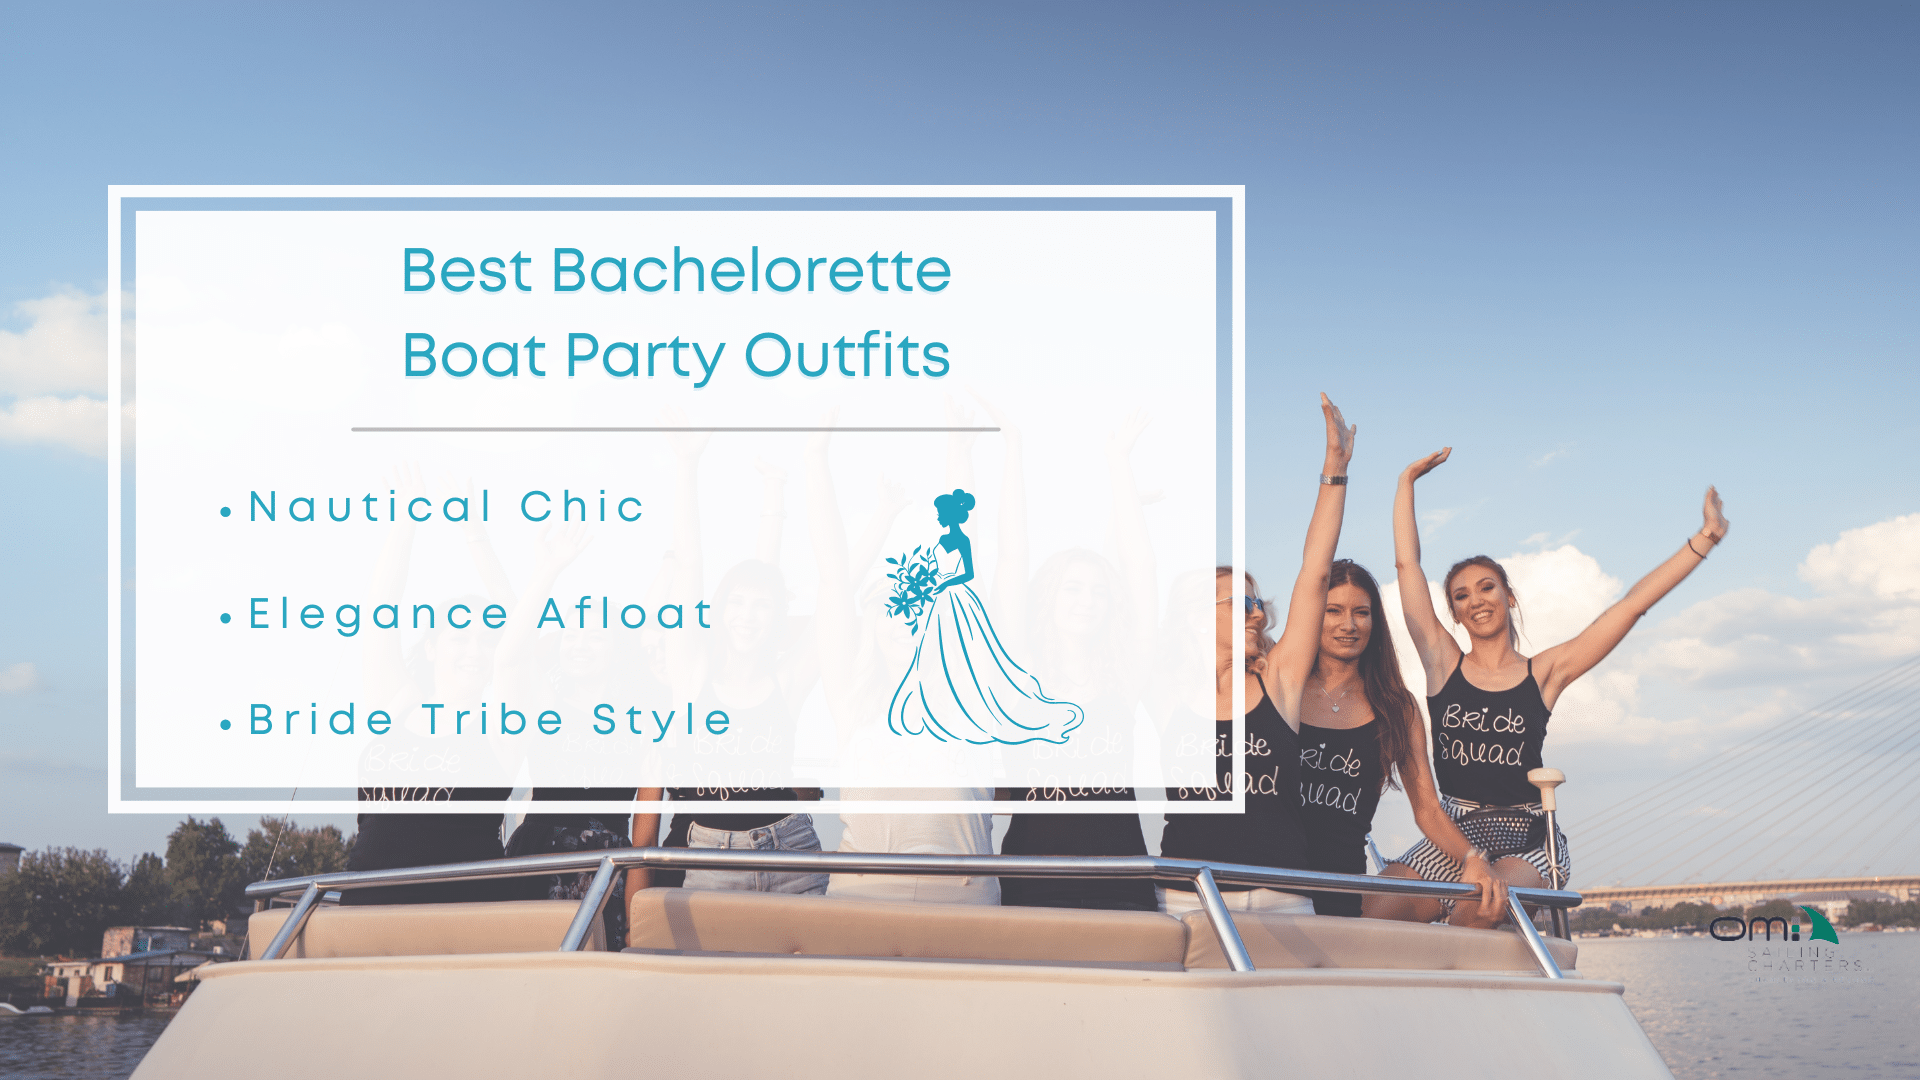 Infographic image of best bachelorette boat party outfits